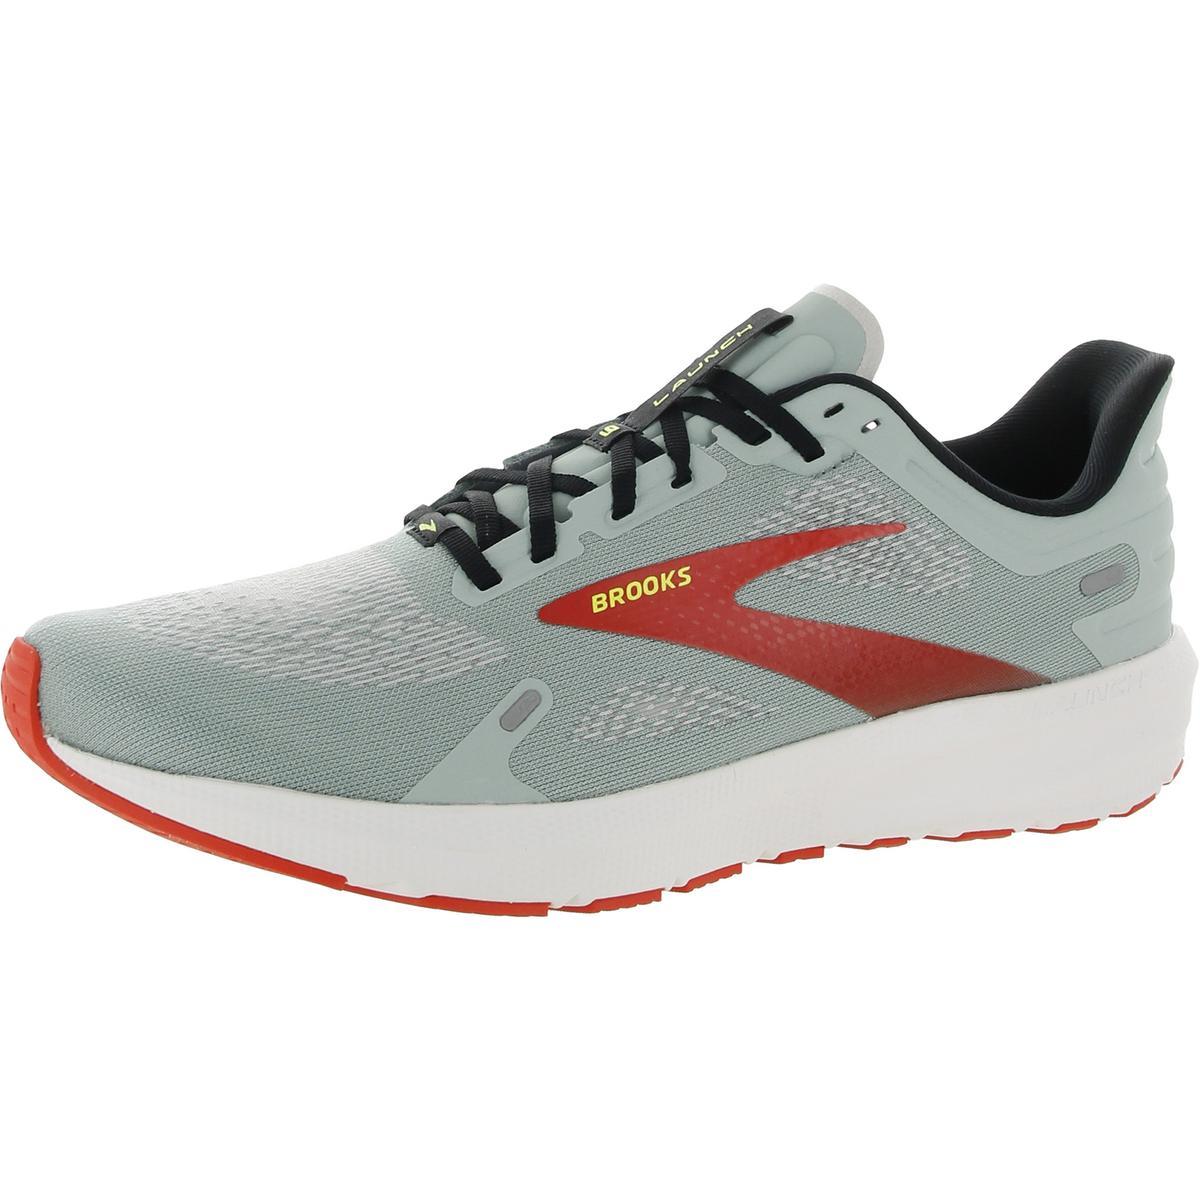 Brooks Mens Launch 9 Trainers Fitness Mesh Running Shoes Sneakers Bhfo 3592 Blue Surf/Black/Cherry Tomato